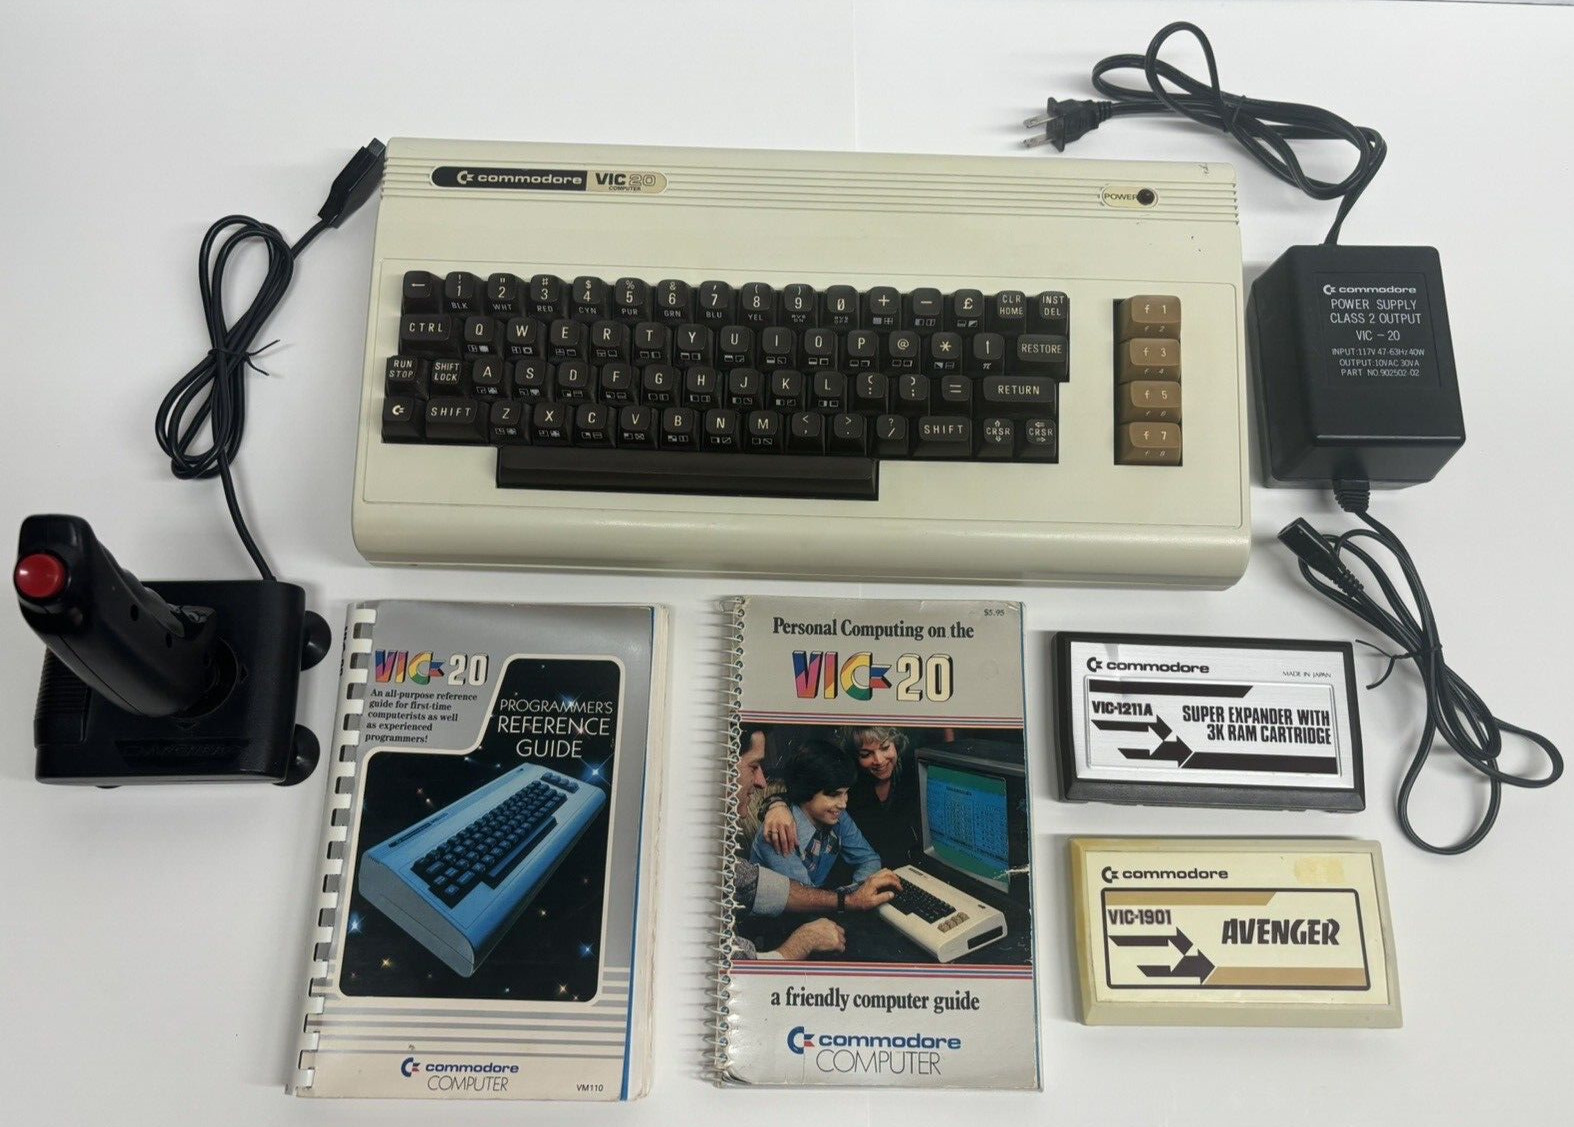 Commodore VIC-20 Vintage Computer System - Tested, Works